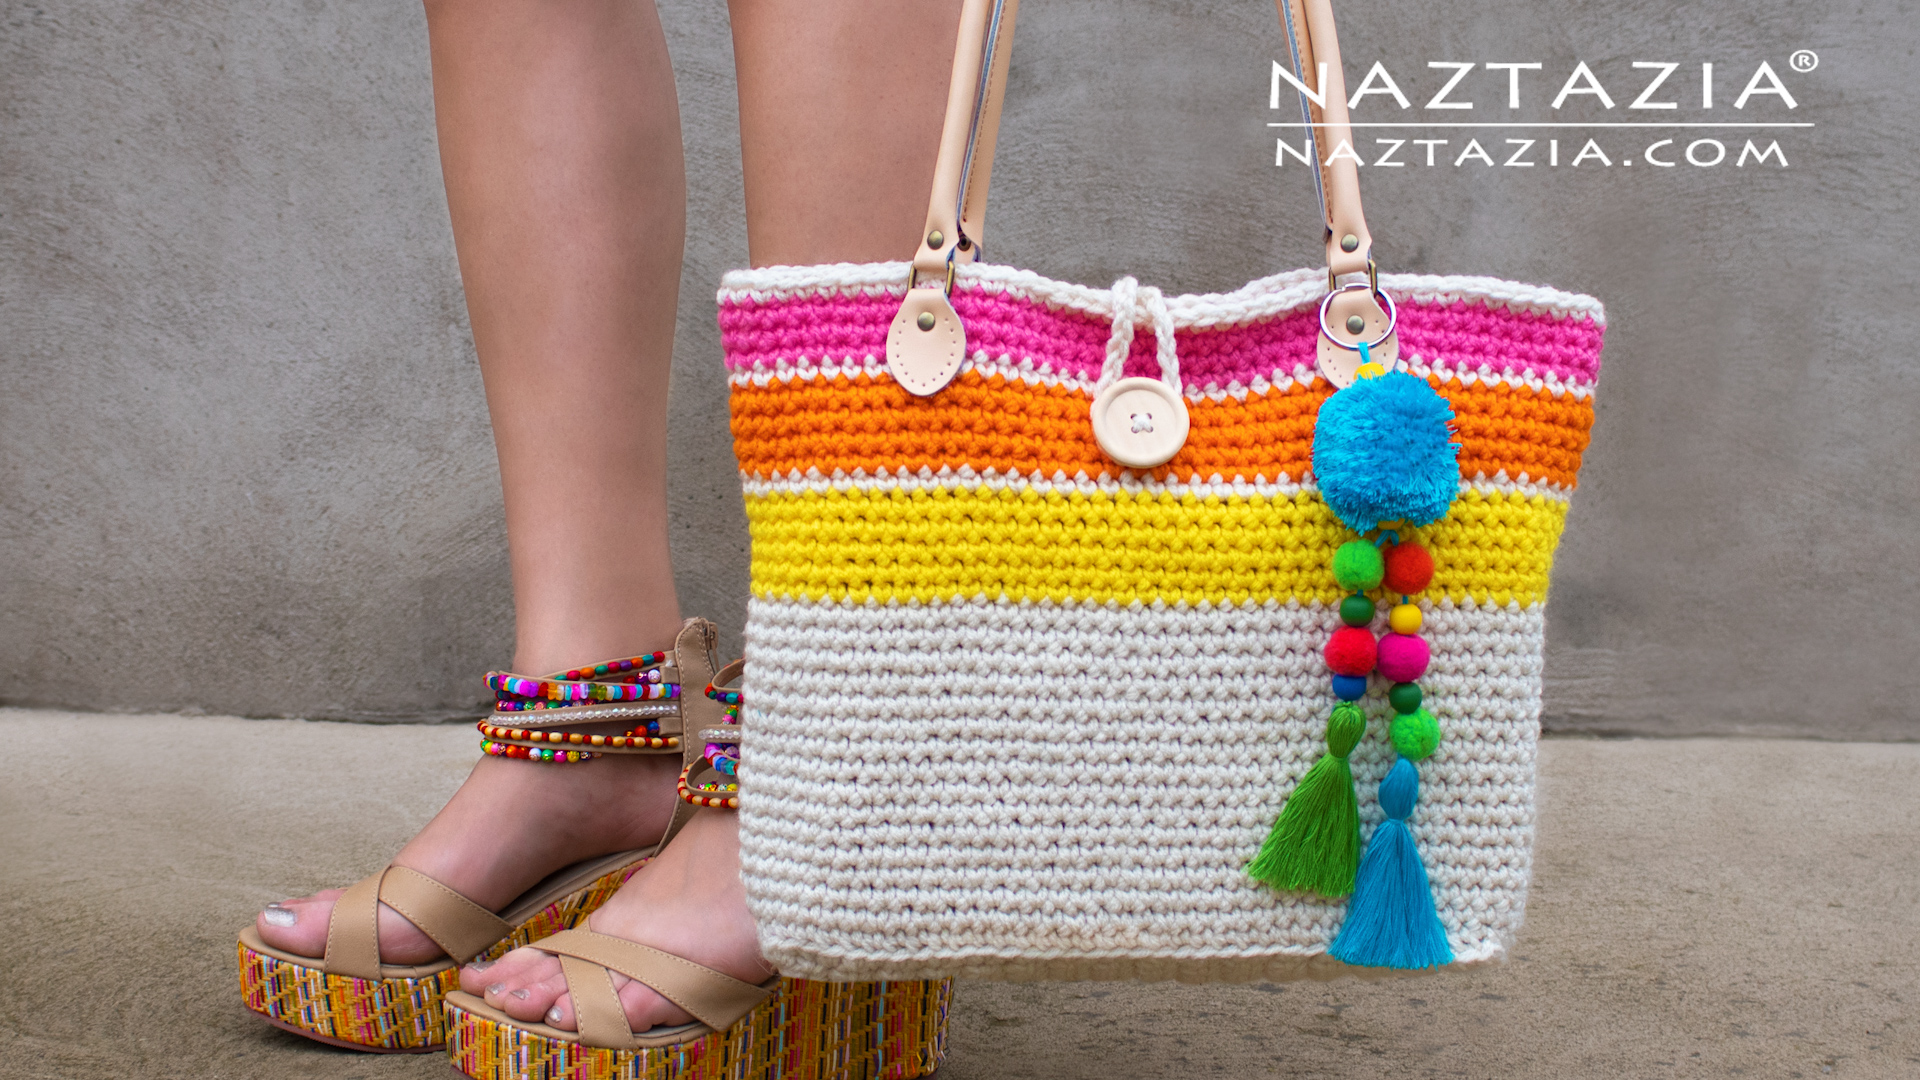 Download How to Crochet a Sweet Simple Tote Bag - Naztazia